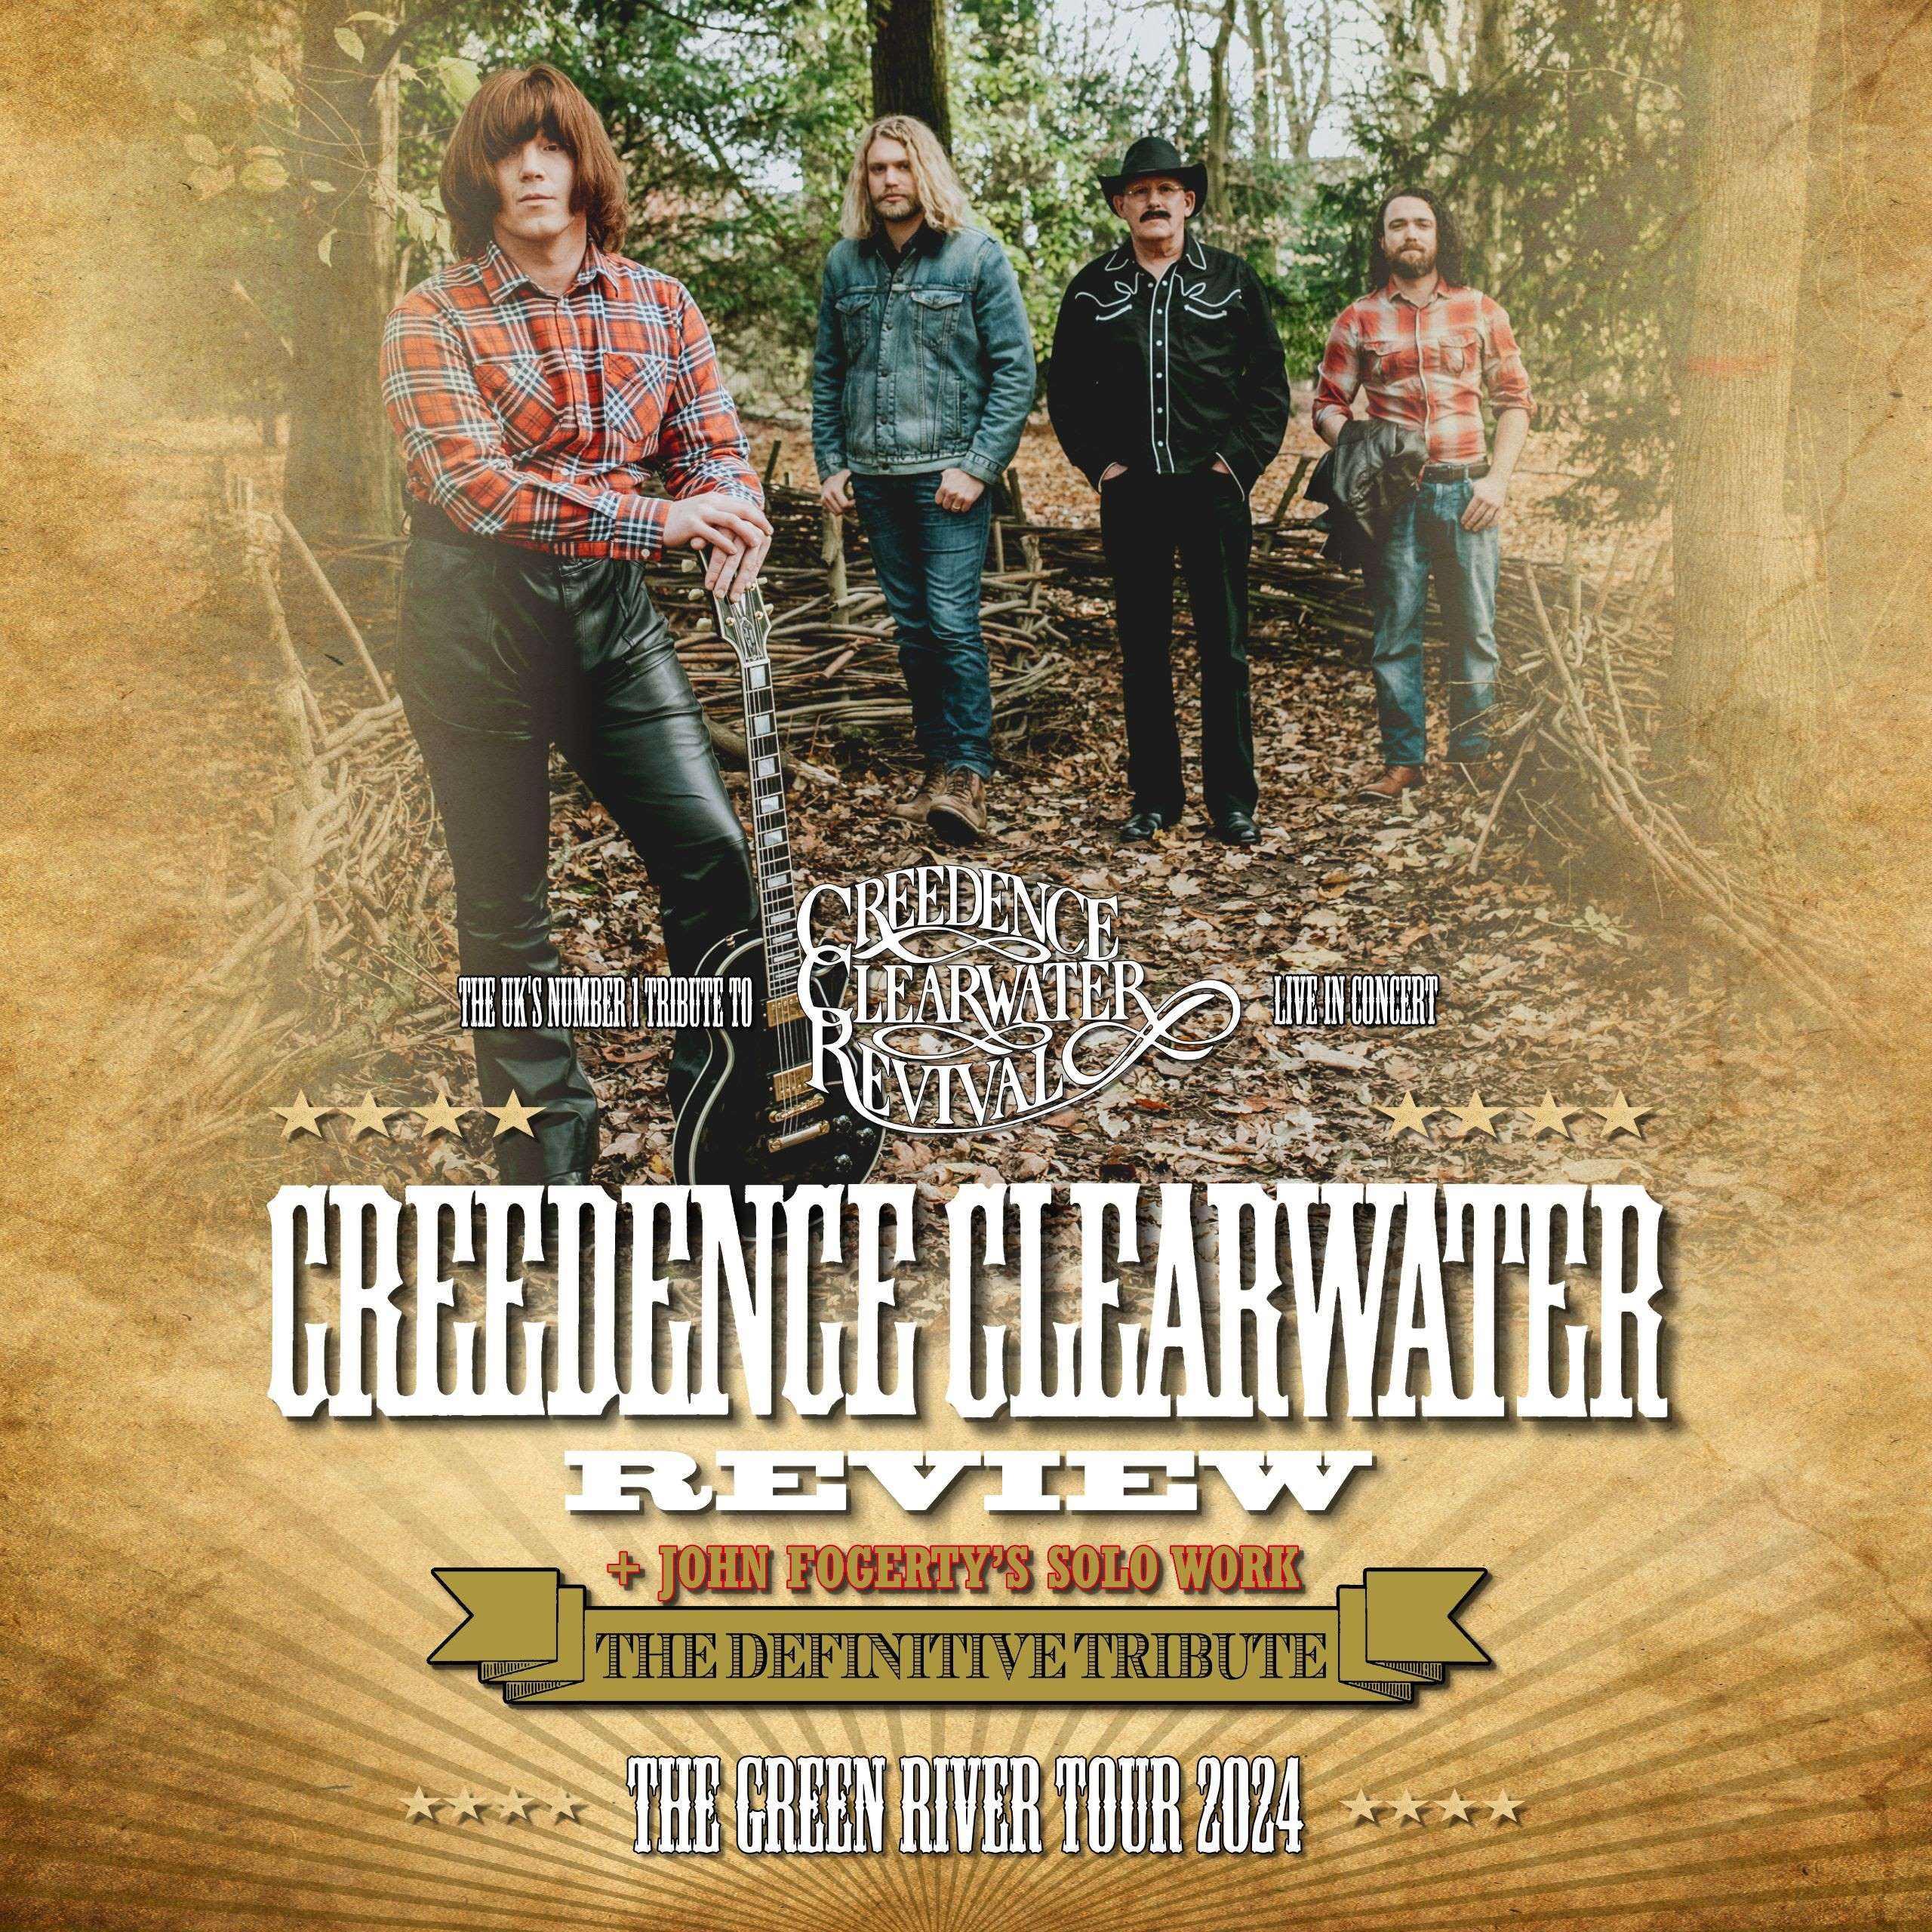 The UK Creedence Clearwater Revival Tribute - Green River Tour